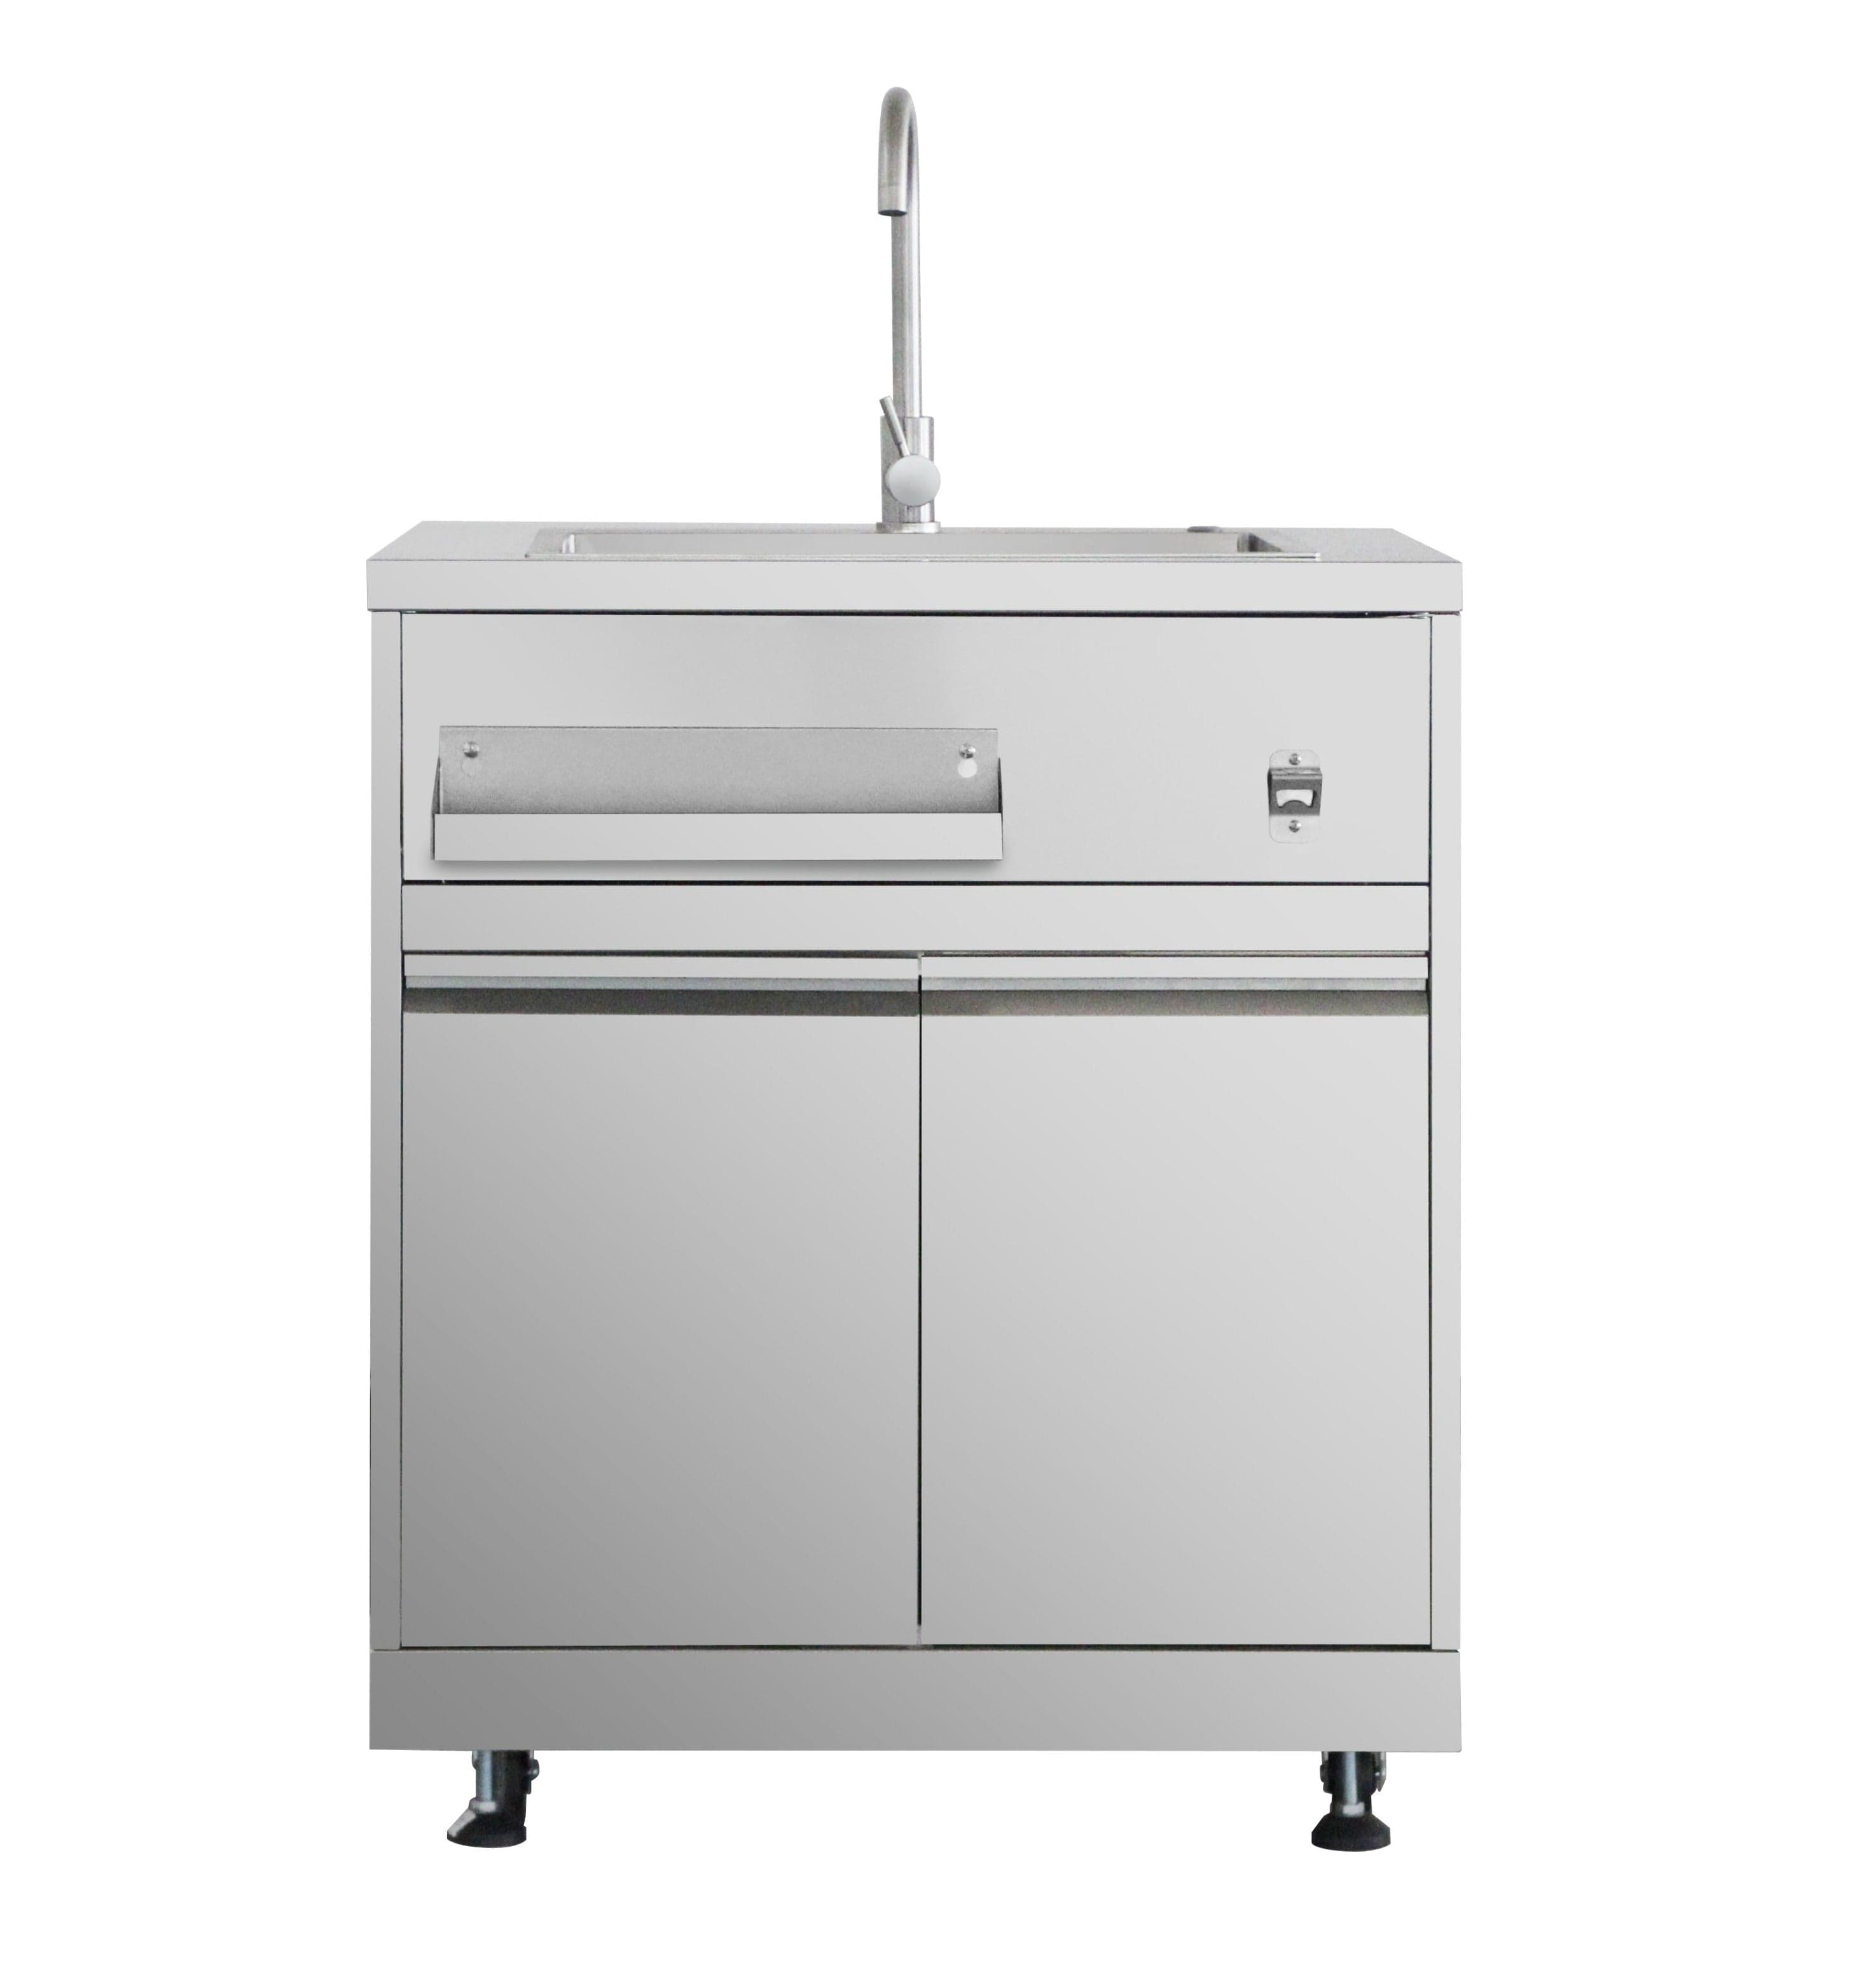 Thor Outdoor Kitchen Package with Propane Gas Grill and Freezer, AP-Outdoor-LP-F-7 Outdoor Grill Package AP-Outdoor-LP-F-7 Luxury Appliances Direct